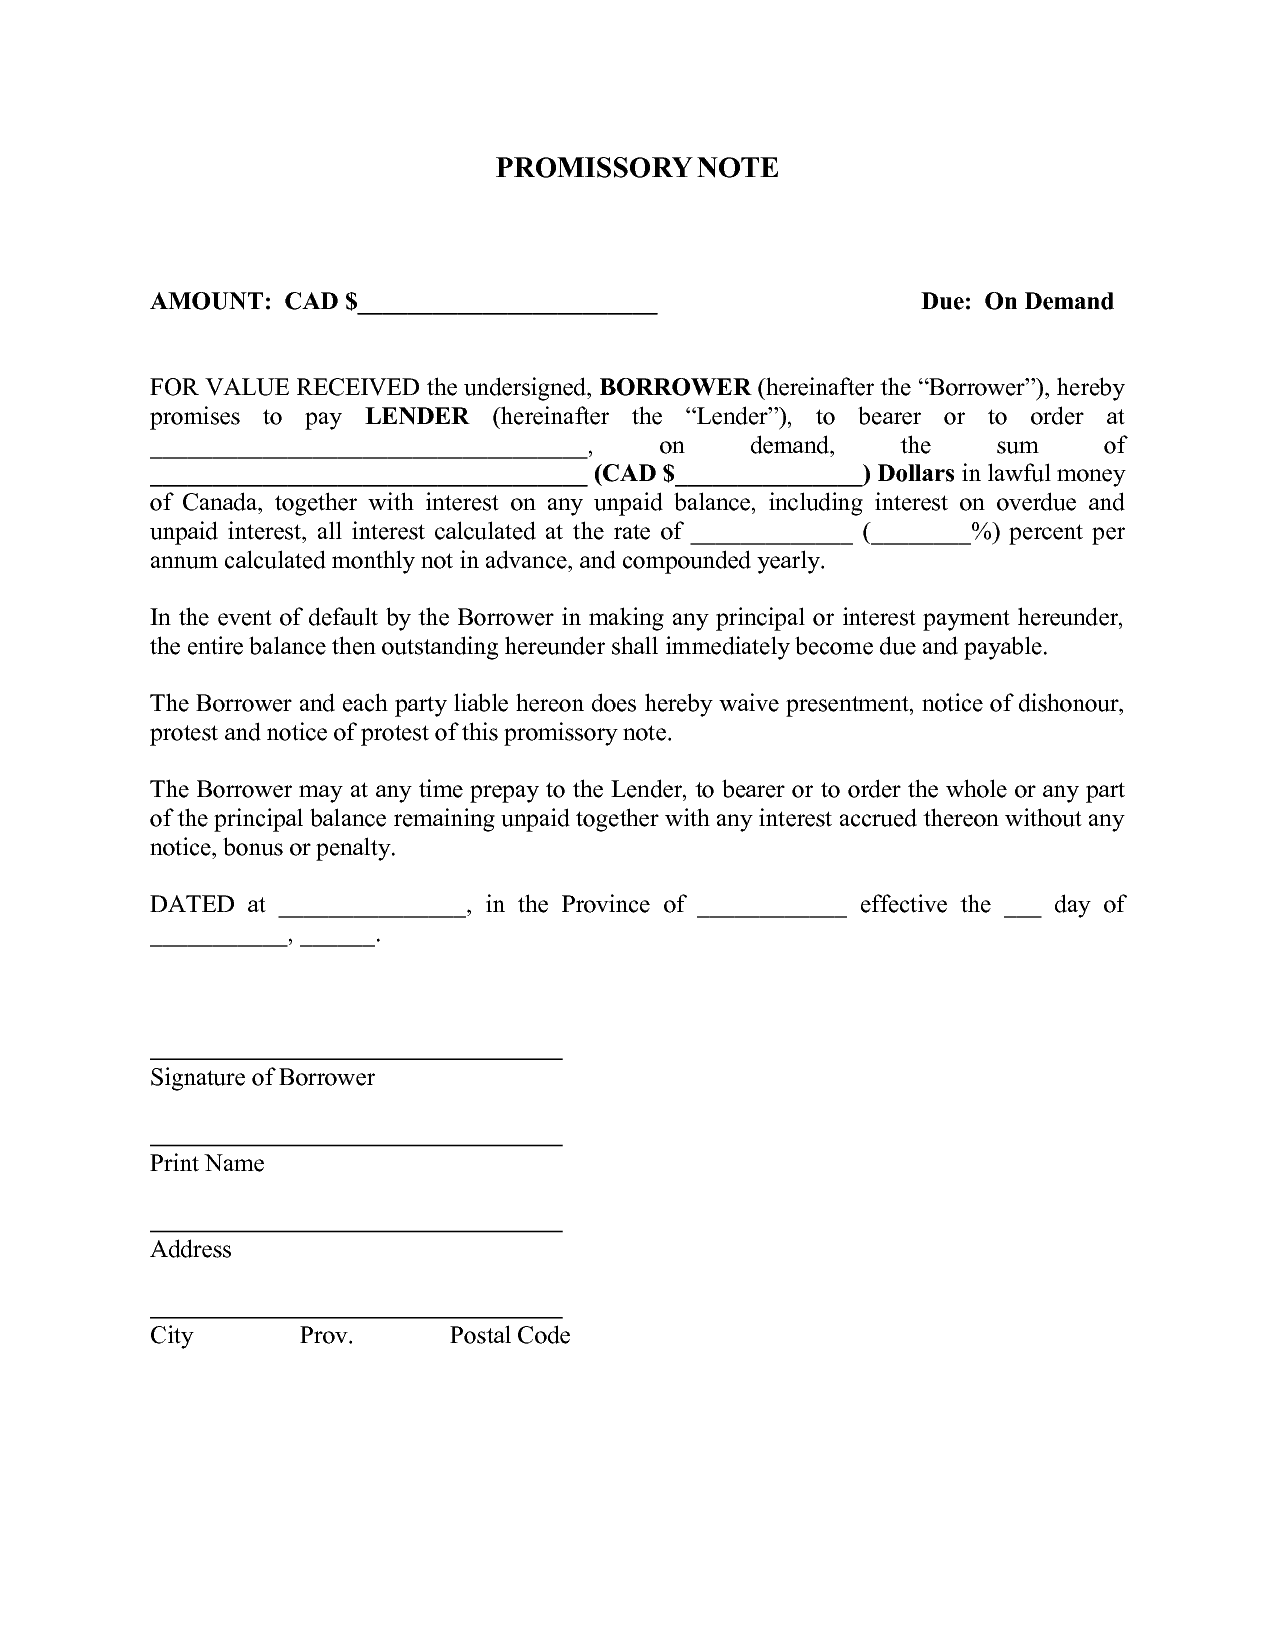 demand-promissory-note-template-free-printable-documents